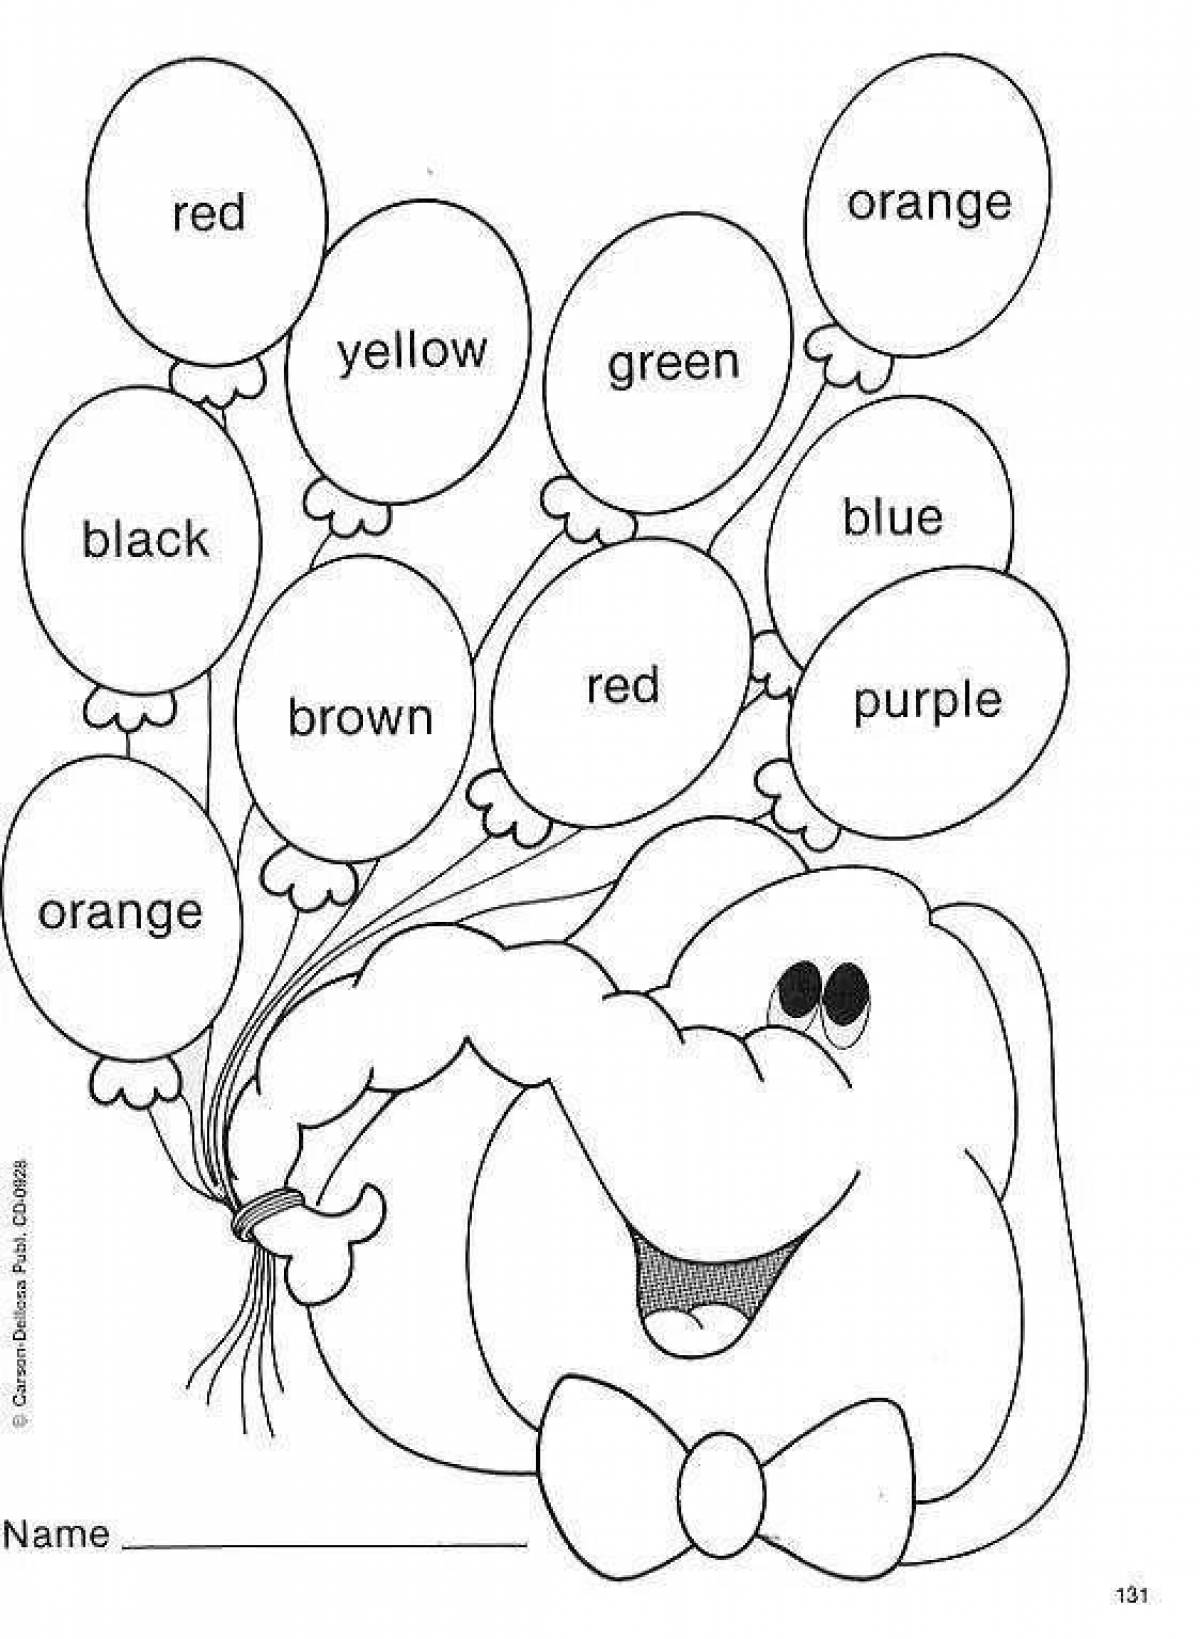 Creative coloring with tasks